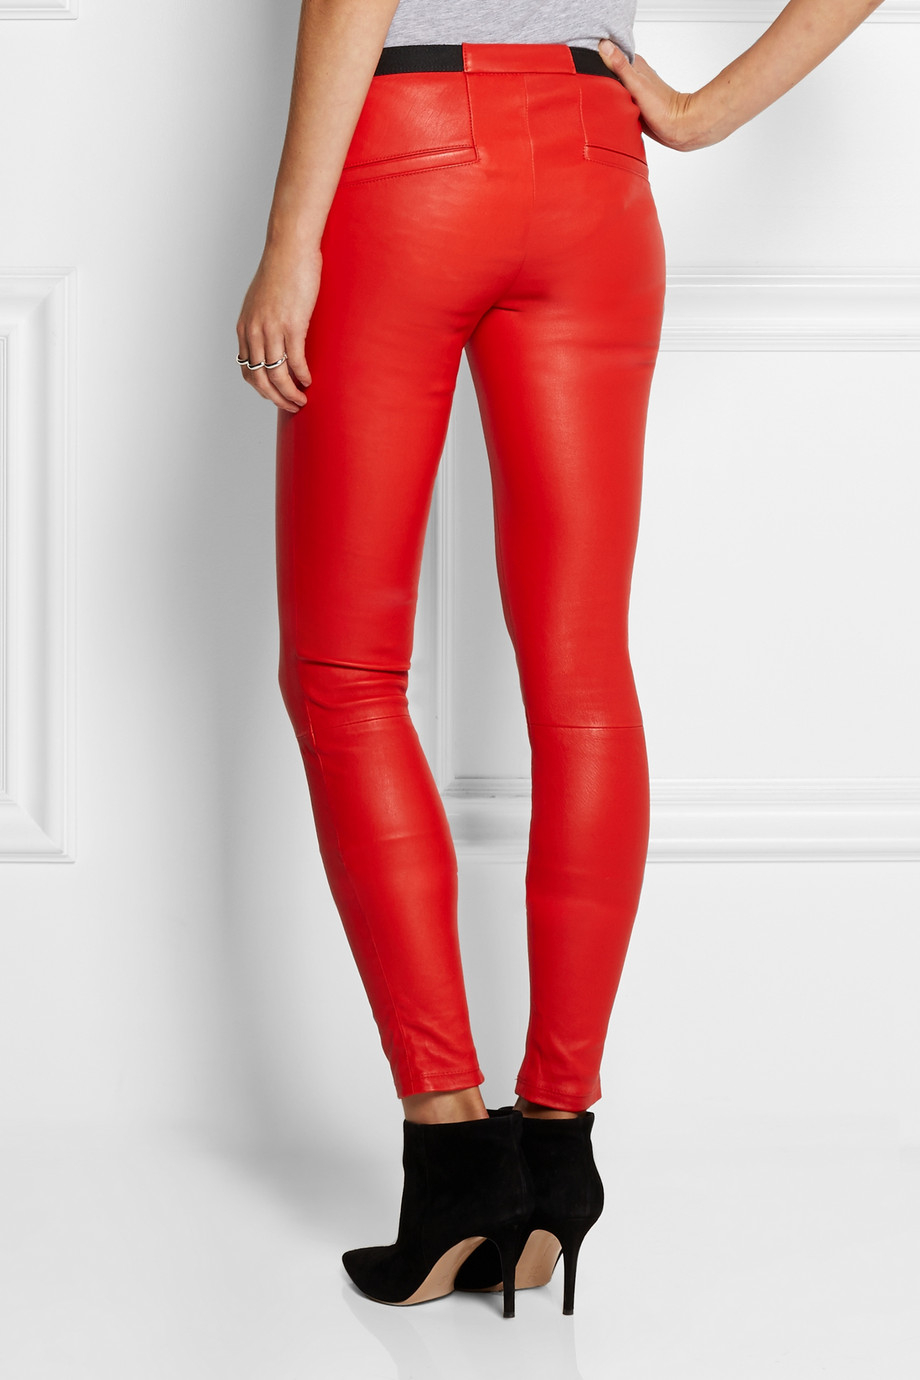 Helmut Lang Leather Leggings in Red - Lyst